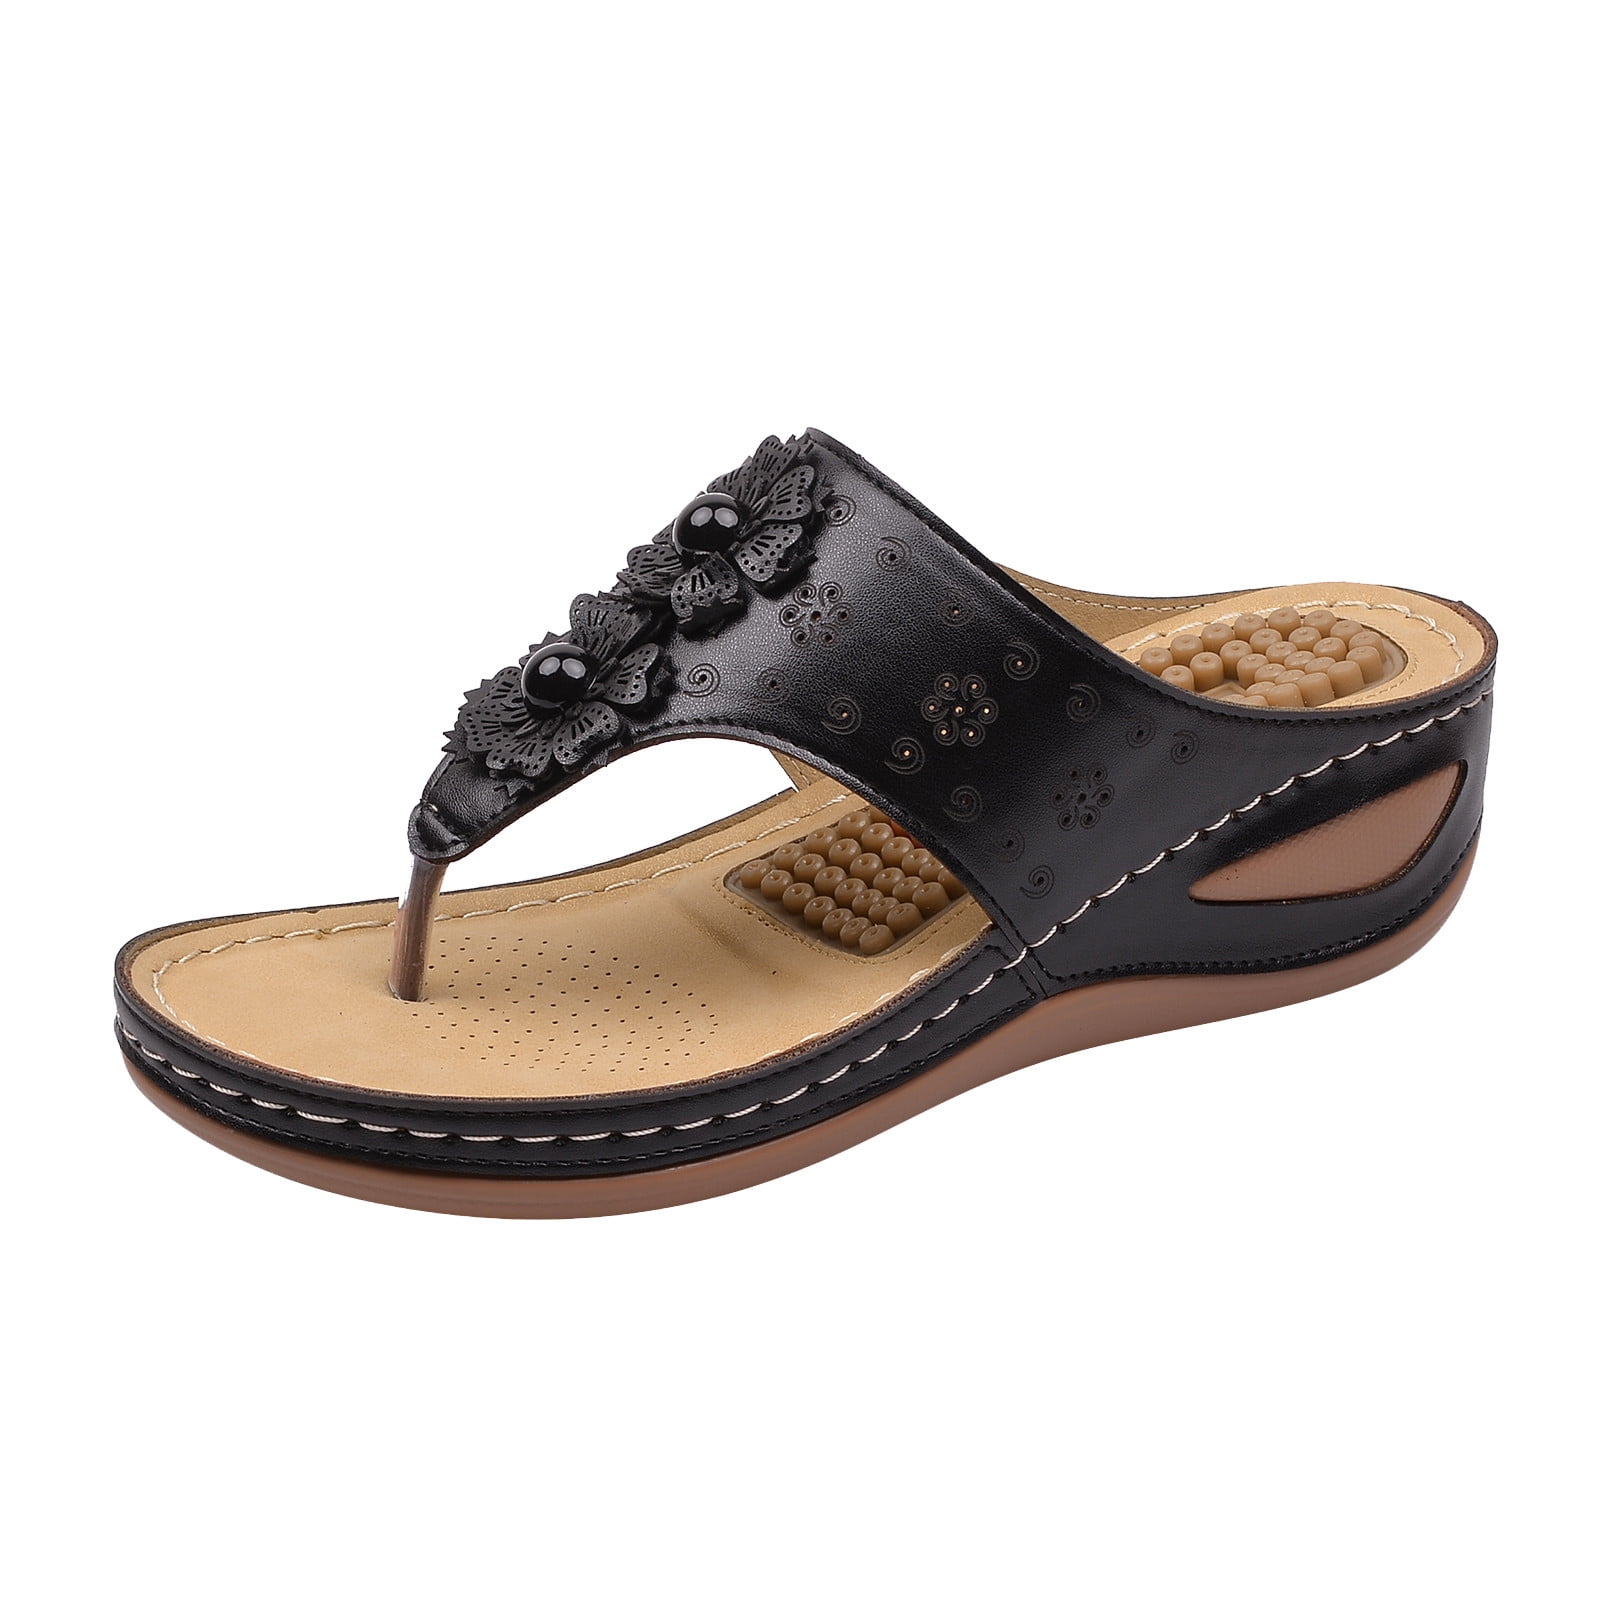 Flip Flops Sandals For Women With Arch Support For Comfortable Walk ...